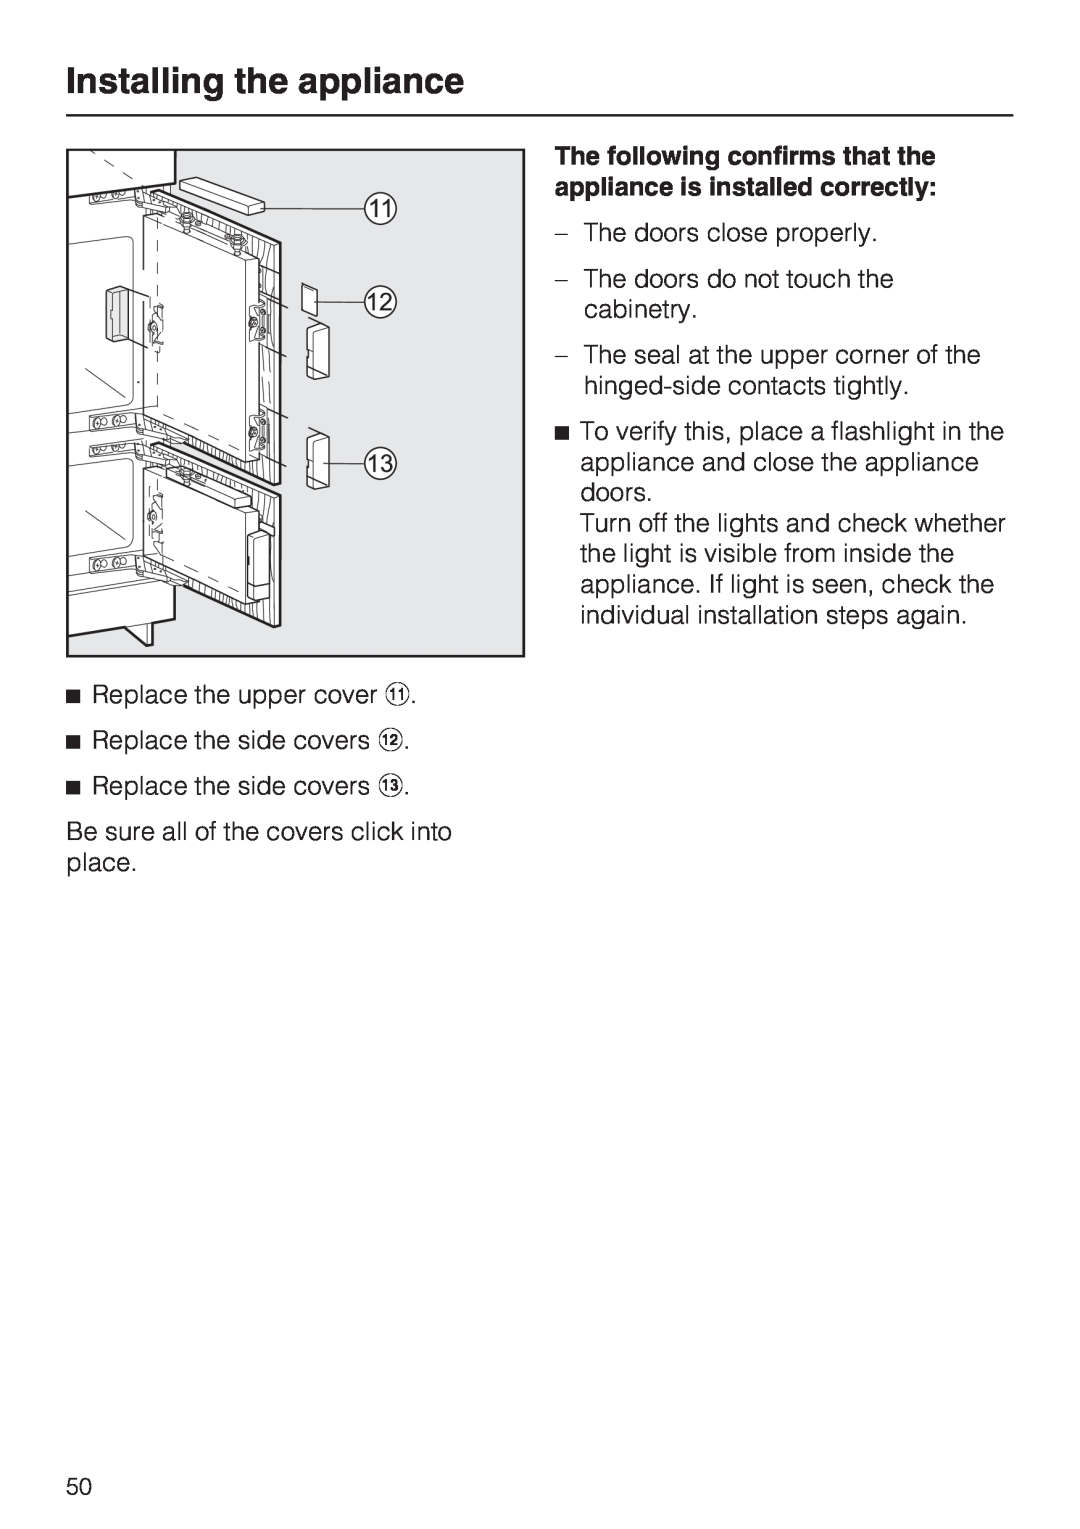 Miele KFN 9753 ID installation instructions Installing the appliance, The doors close properly 